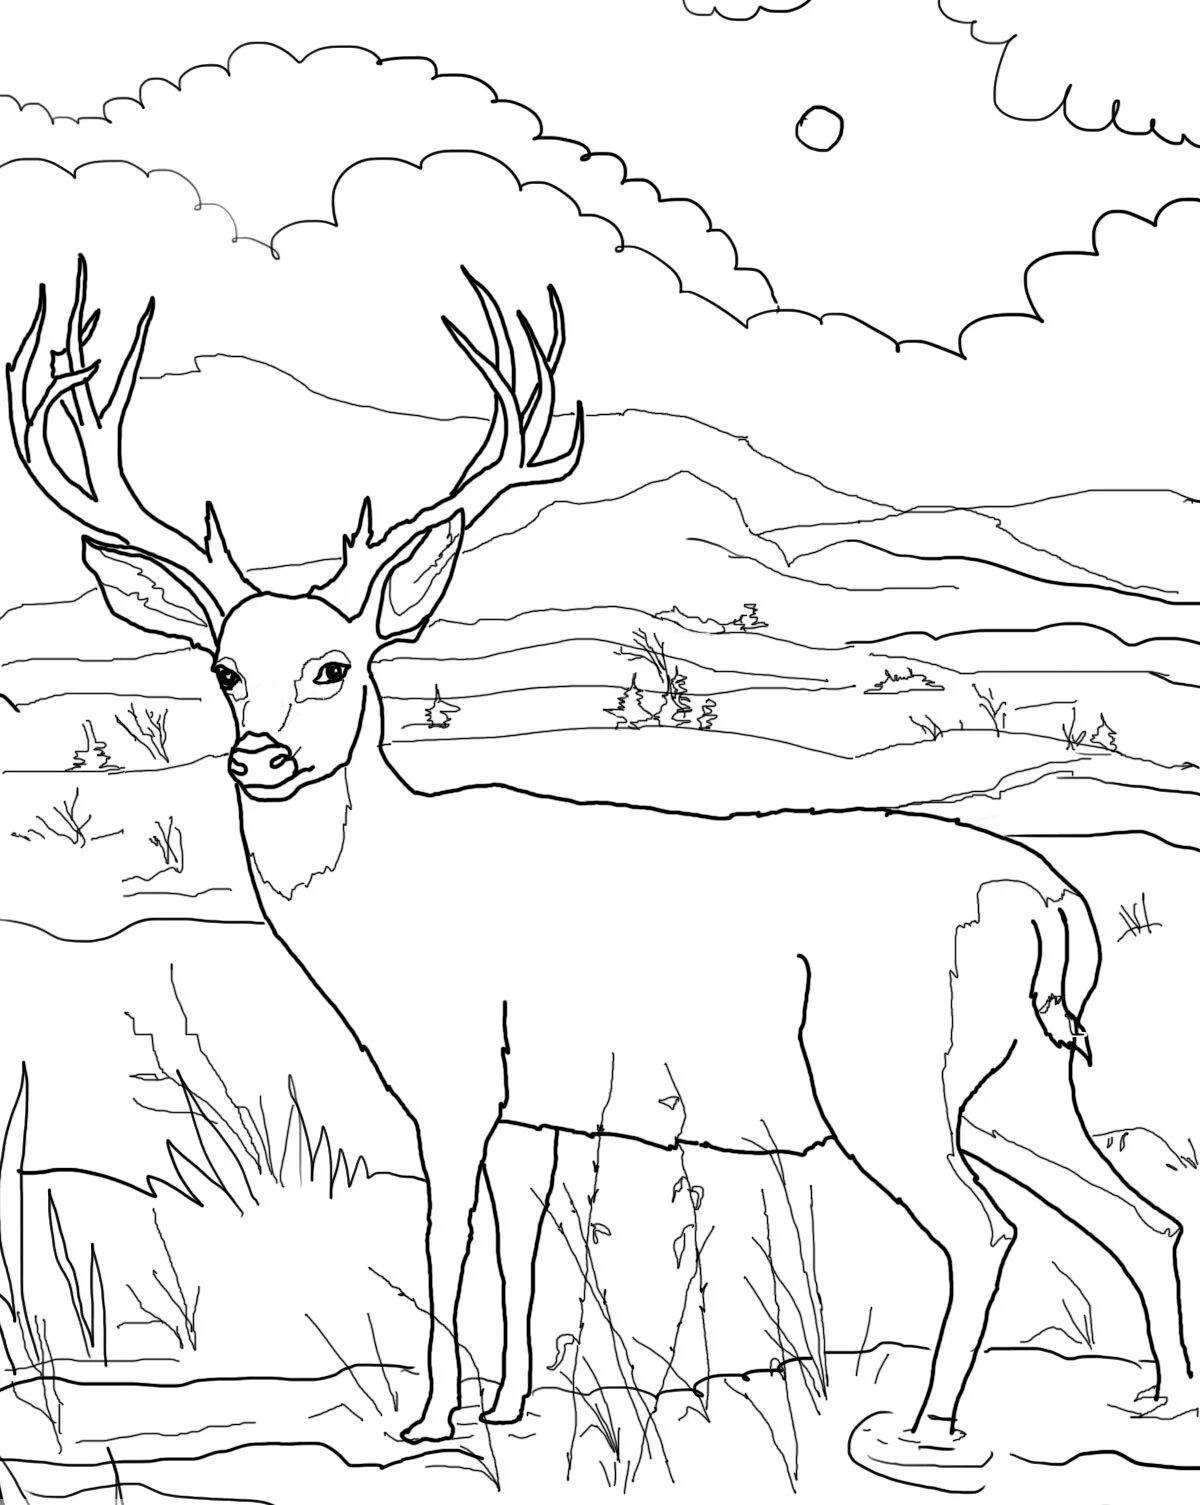 Charming deer coloring page